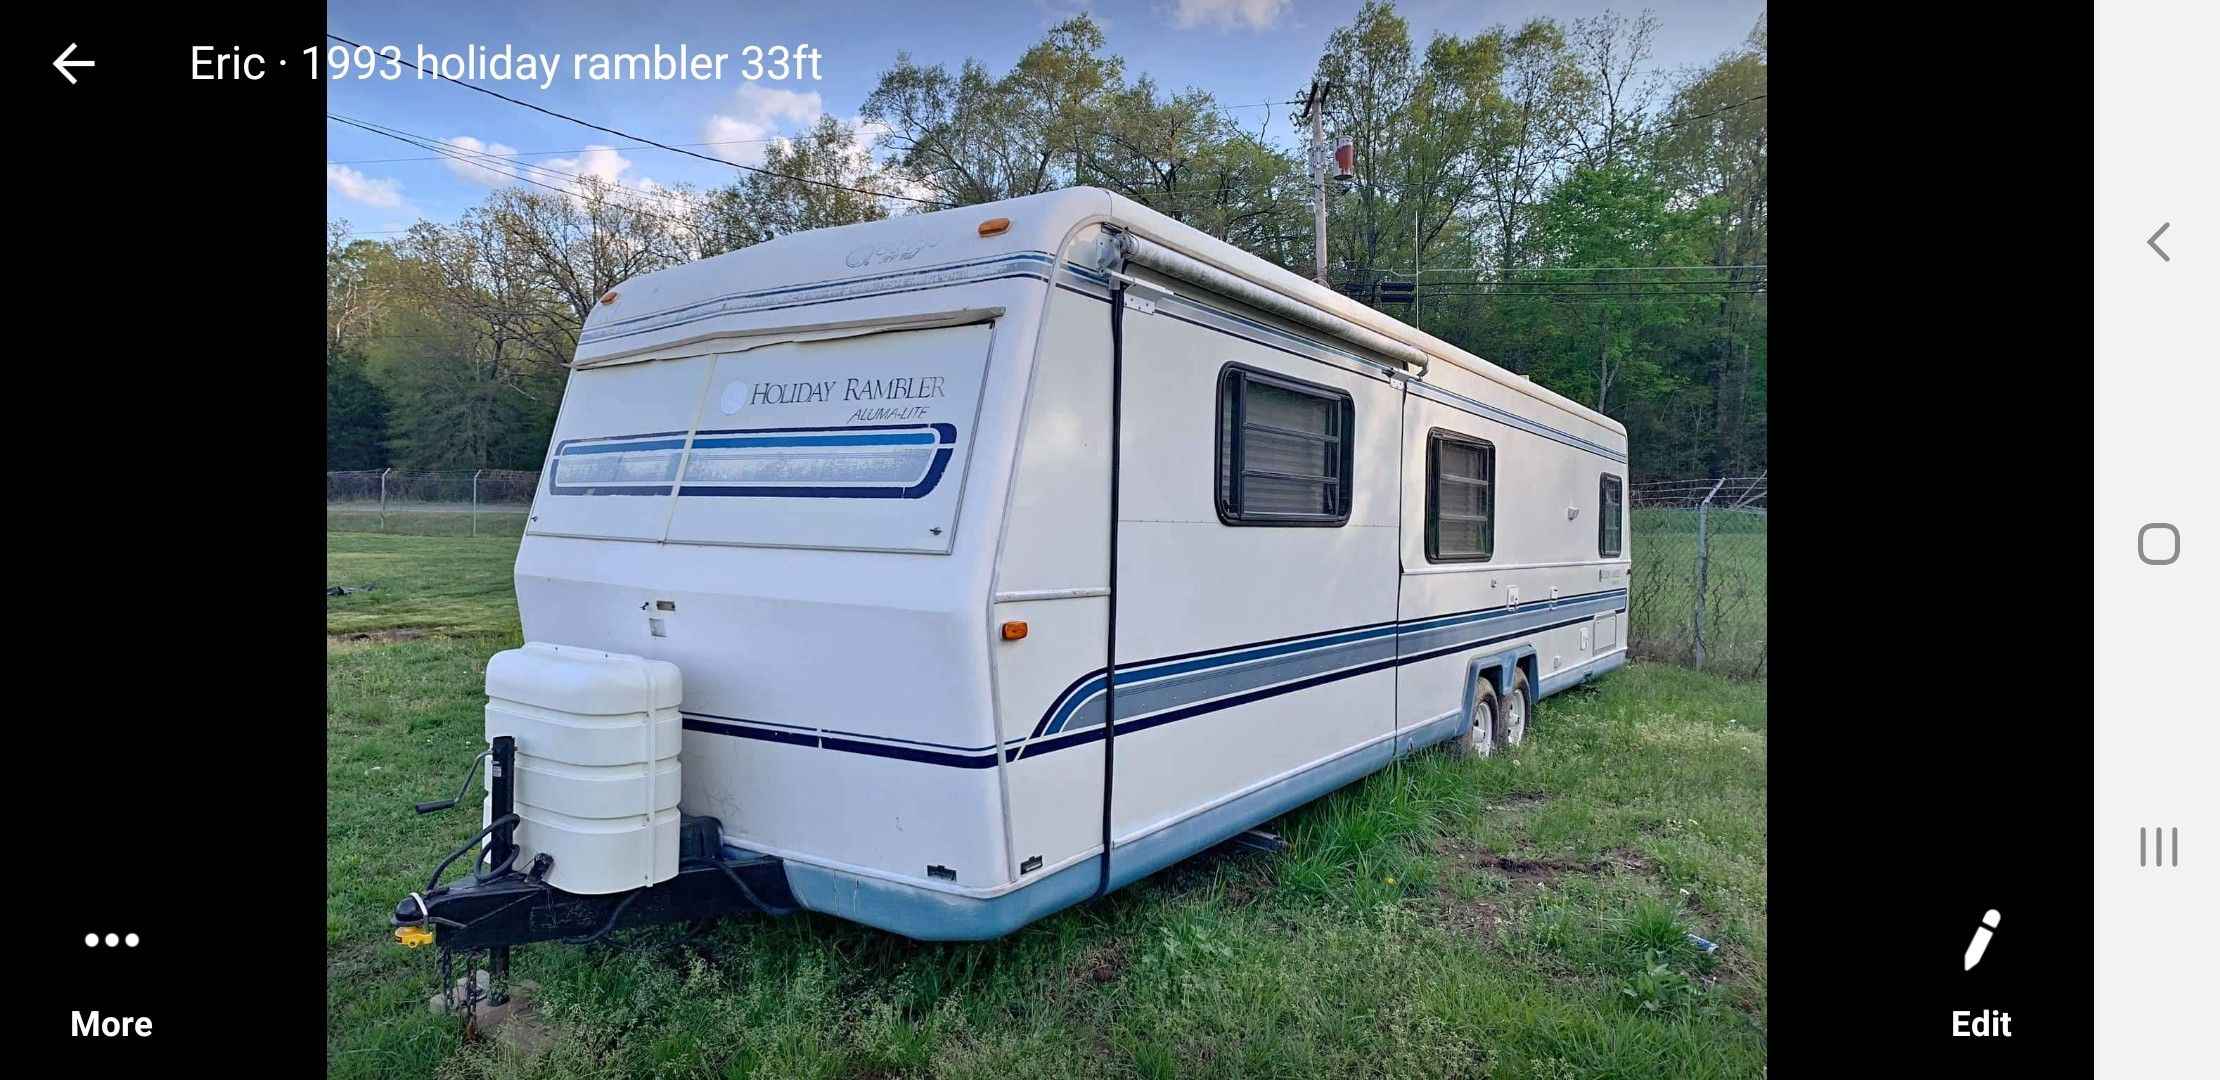 93 holiday rambler (CAMPER) great condition